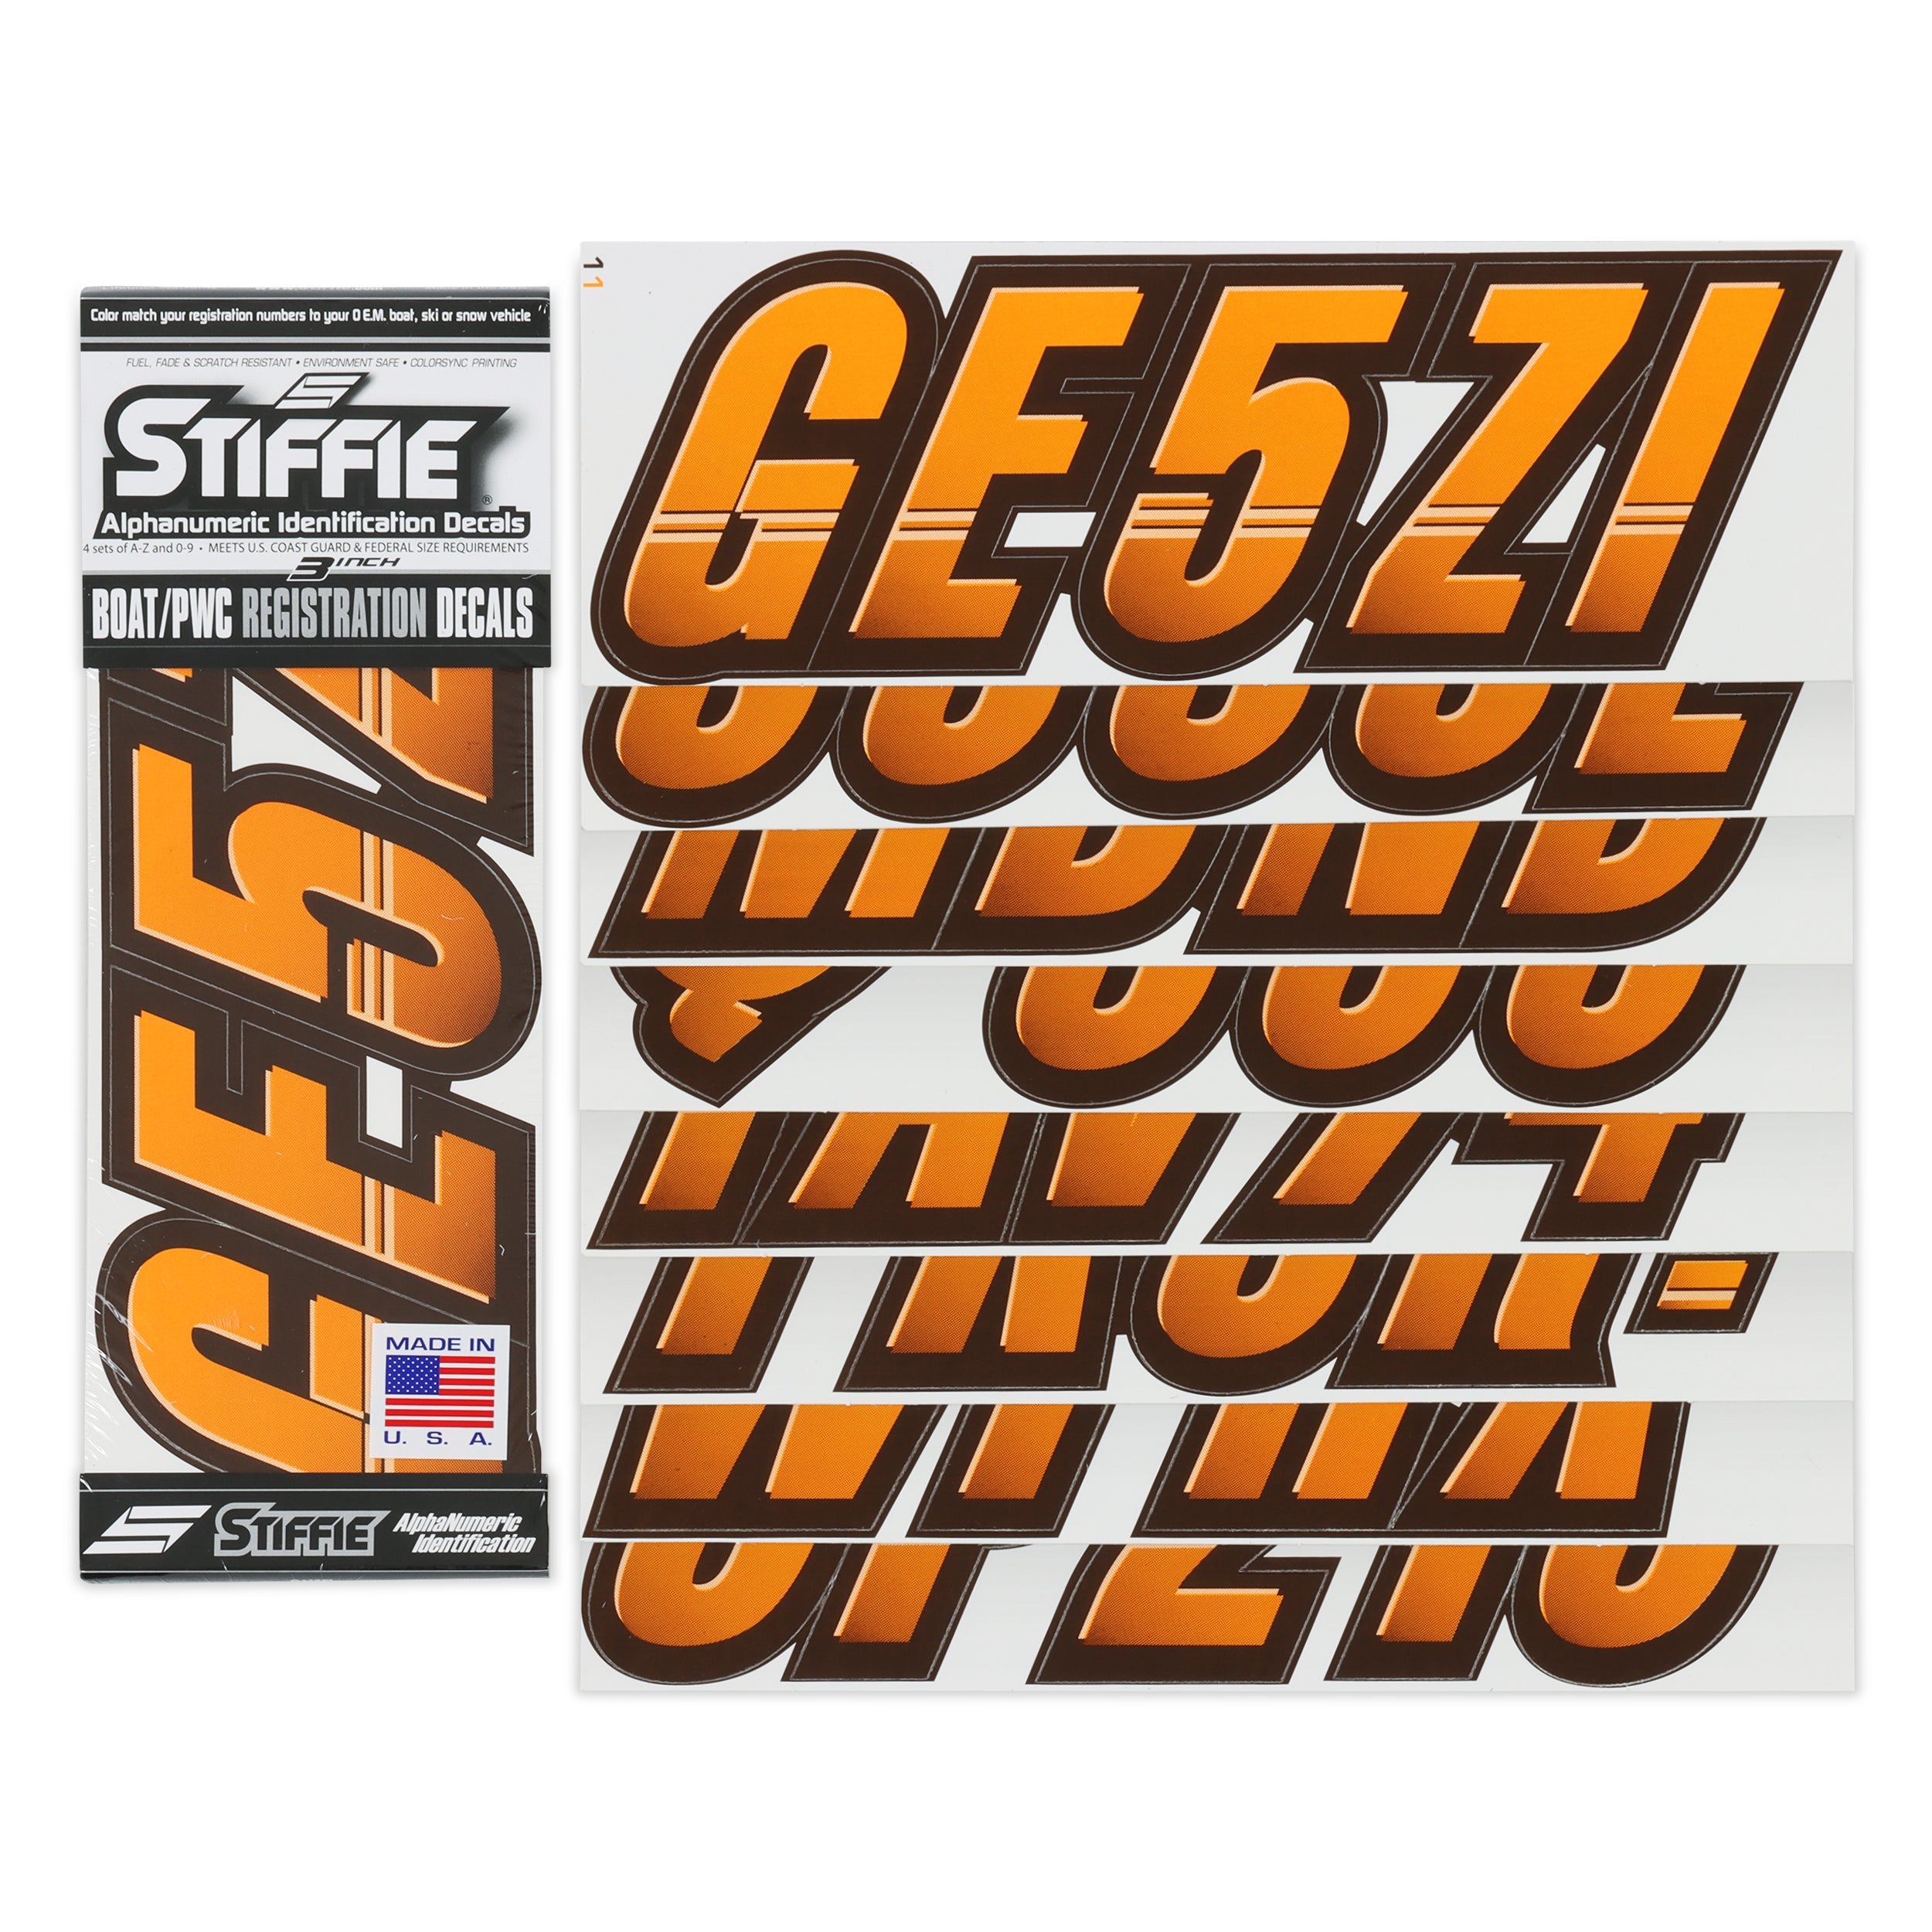 Stiffie Techtron Gold Rush / Black 3" Alpha-Numeric Registration Identification Numbers Stickers Decals for Boats & Personal Watercraft